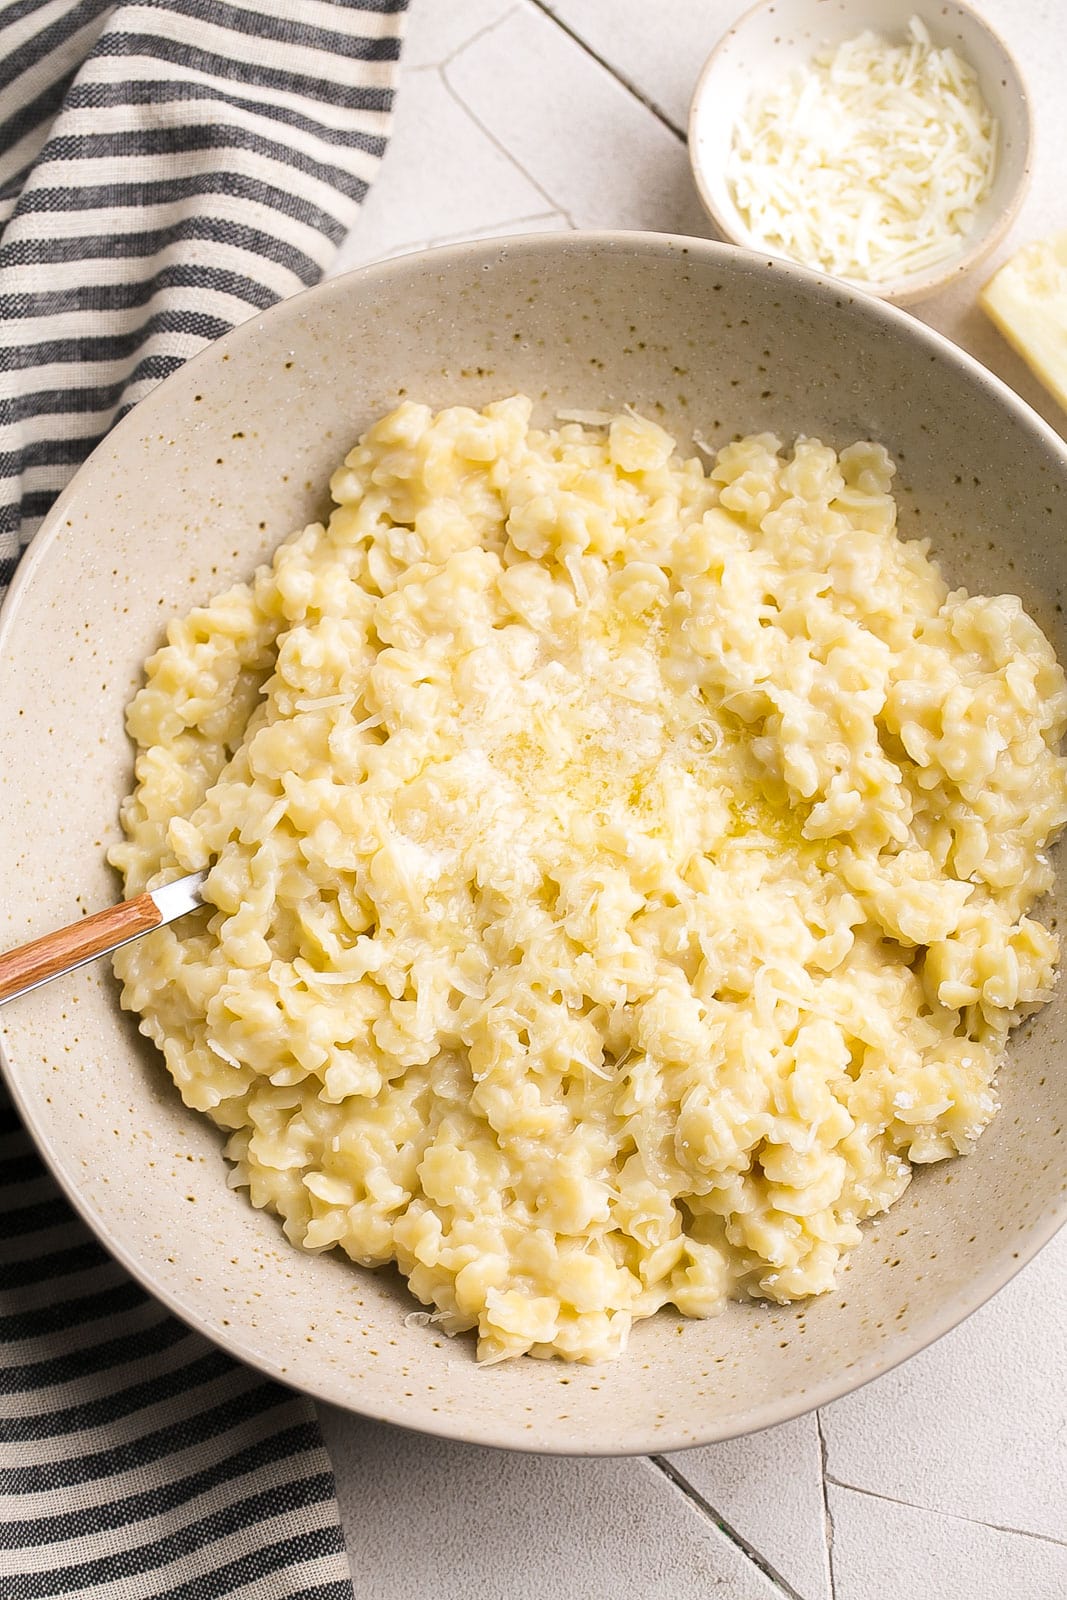 The best pastina recipe in a bowl with melted butter and parmesan cheese.